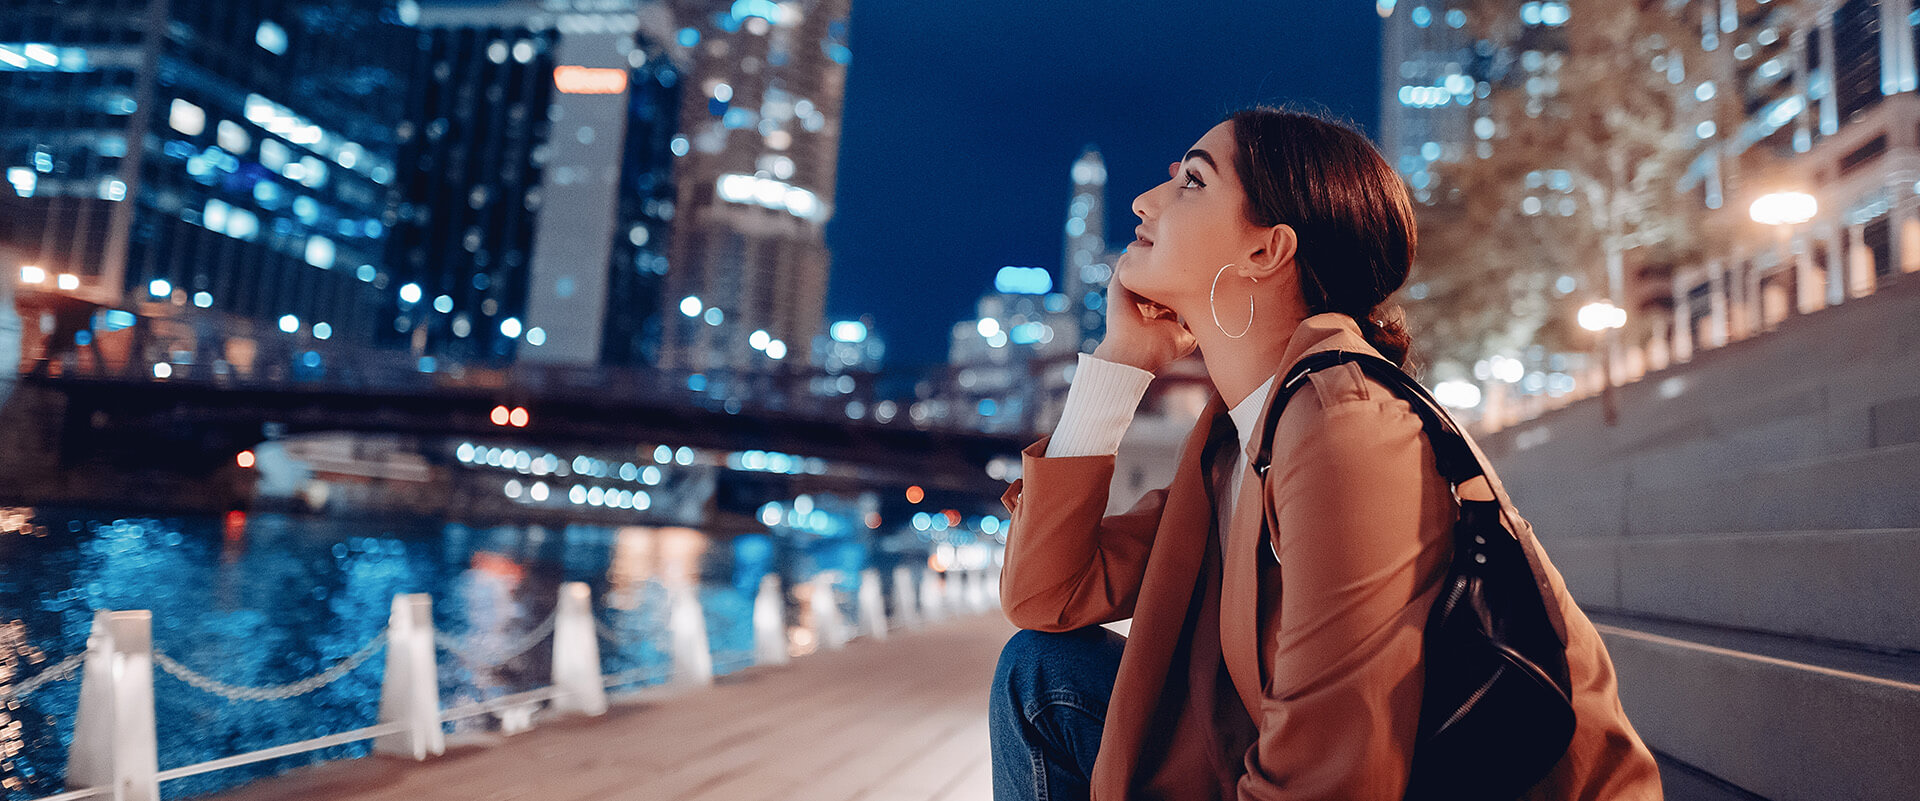 Woman sitting by Chicago river at night